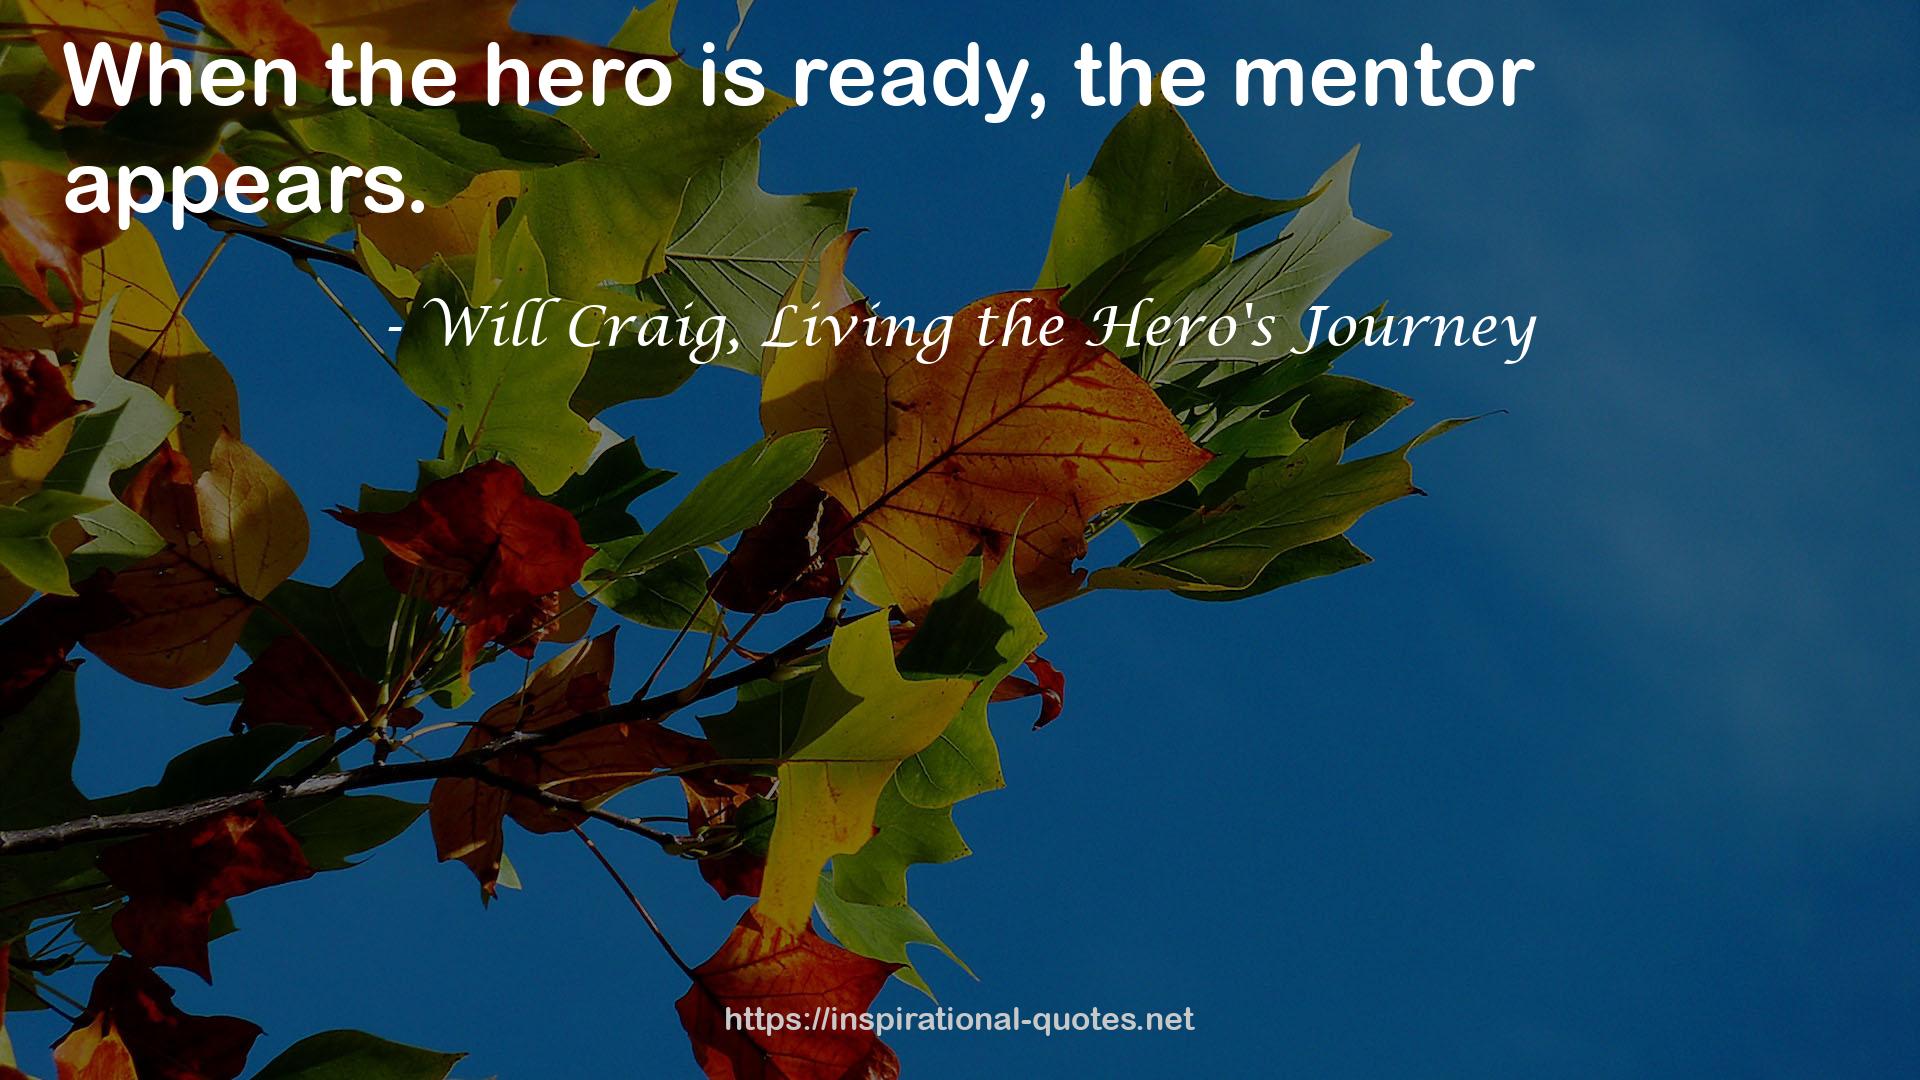 Will Craig, Living the Hero's Journey QUOTES